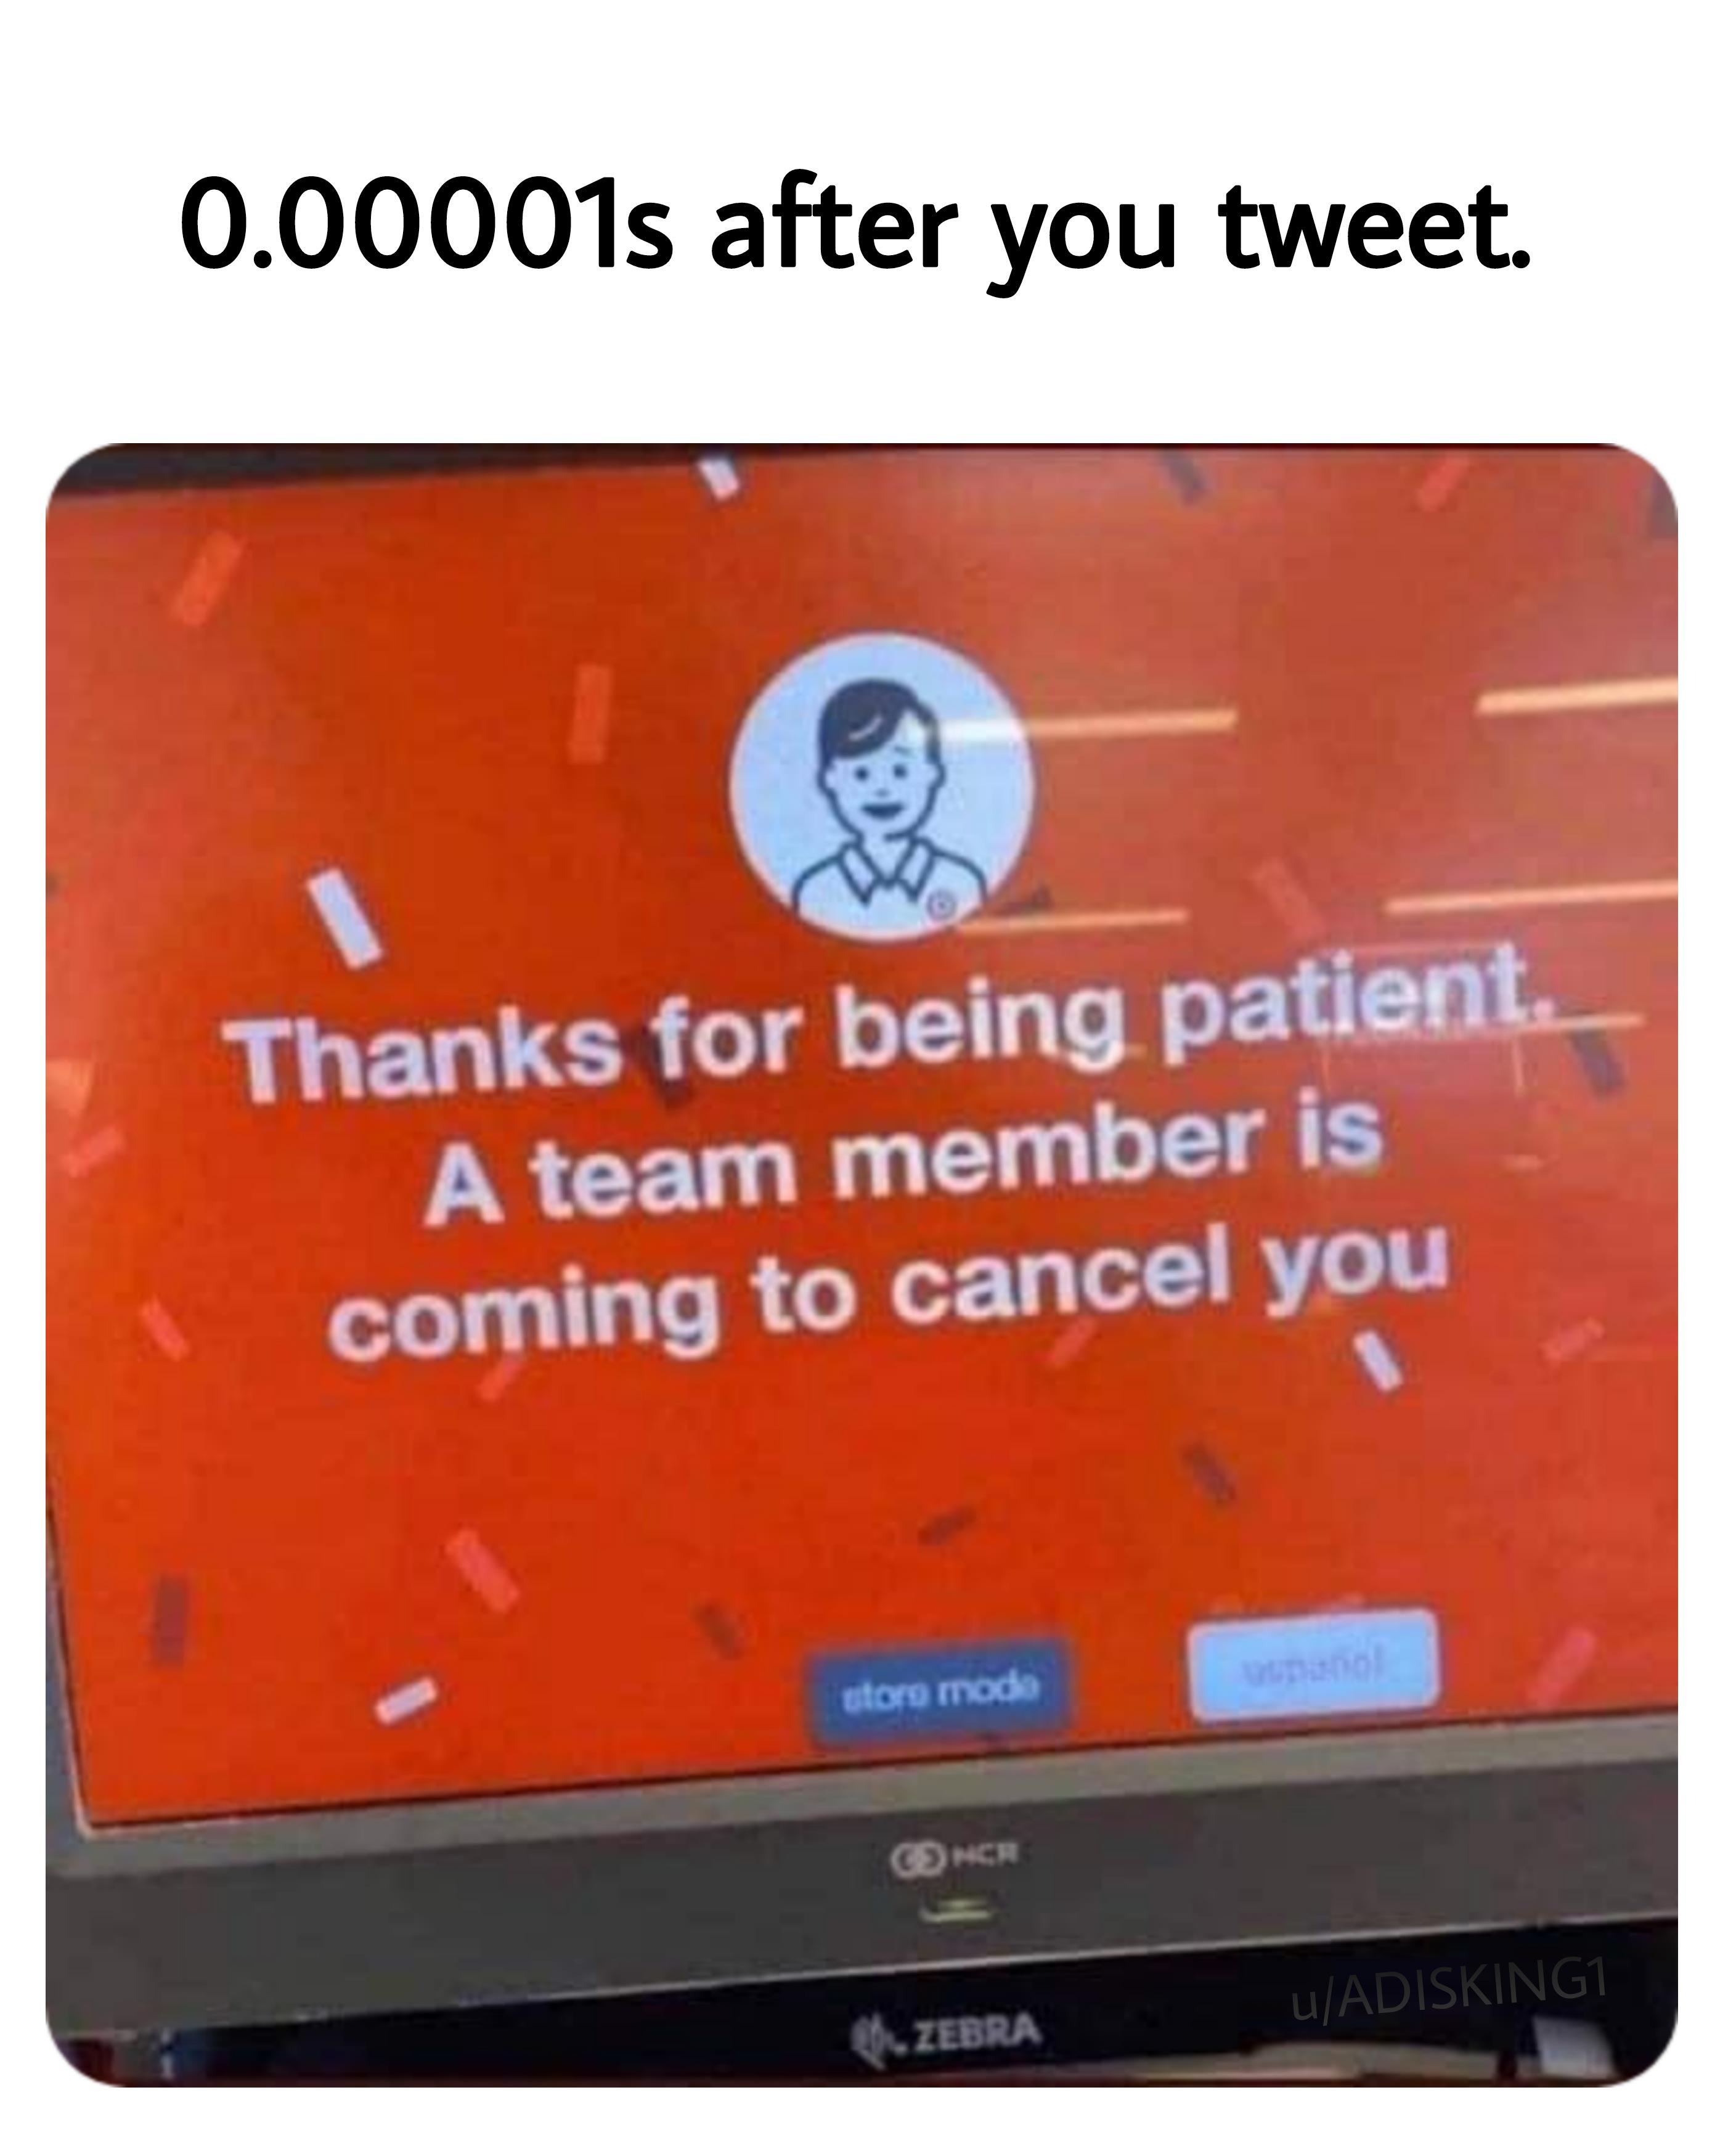 funny memes - dank memes - funny typos - 0.00001s after you tweet. Thanks for being patient. A team member is coming to cancel you store mode Concr Zebra uADISKING1